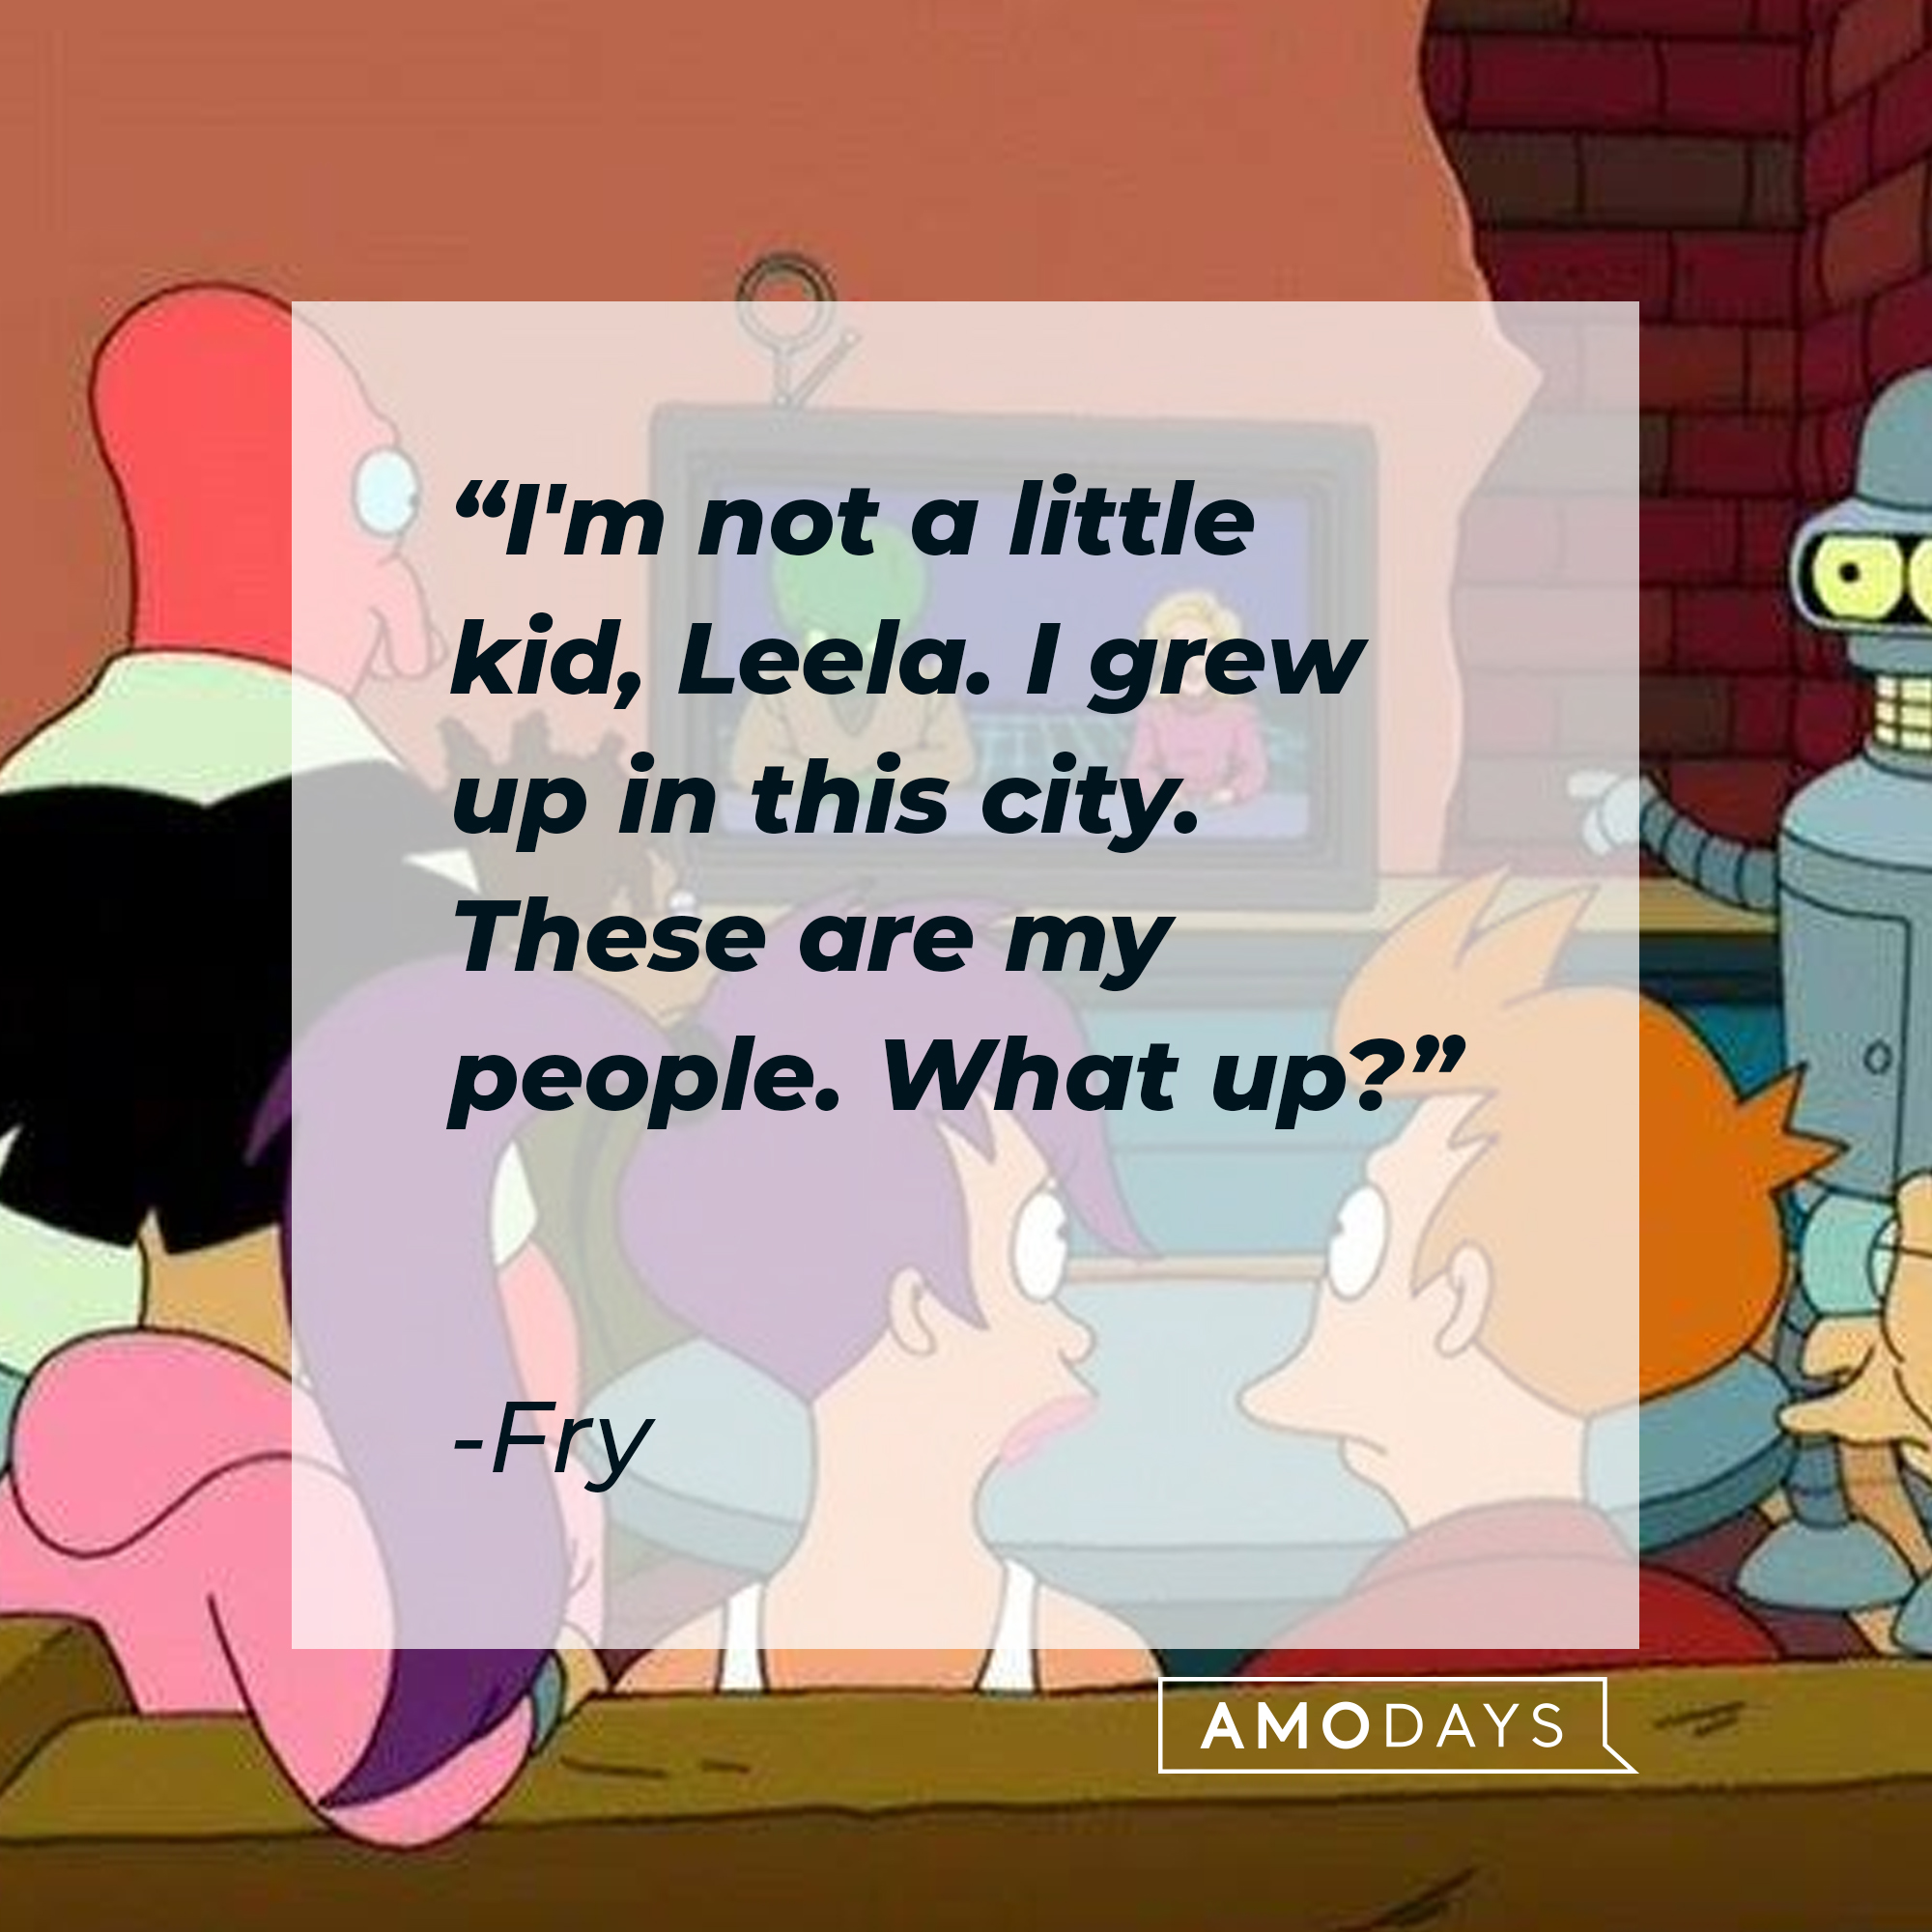 Fry Futurama's quote: "I'm not a little kid, Leela. I grew up in this city. These are my people. What up?" | Source: Facebook.com/Futurama